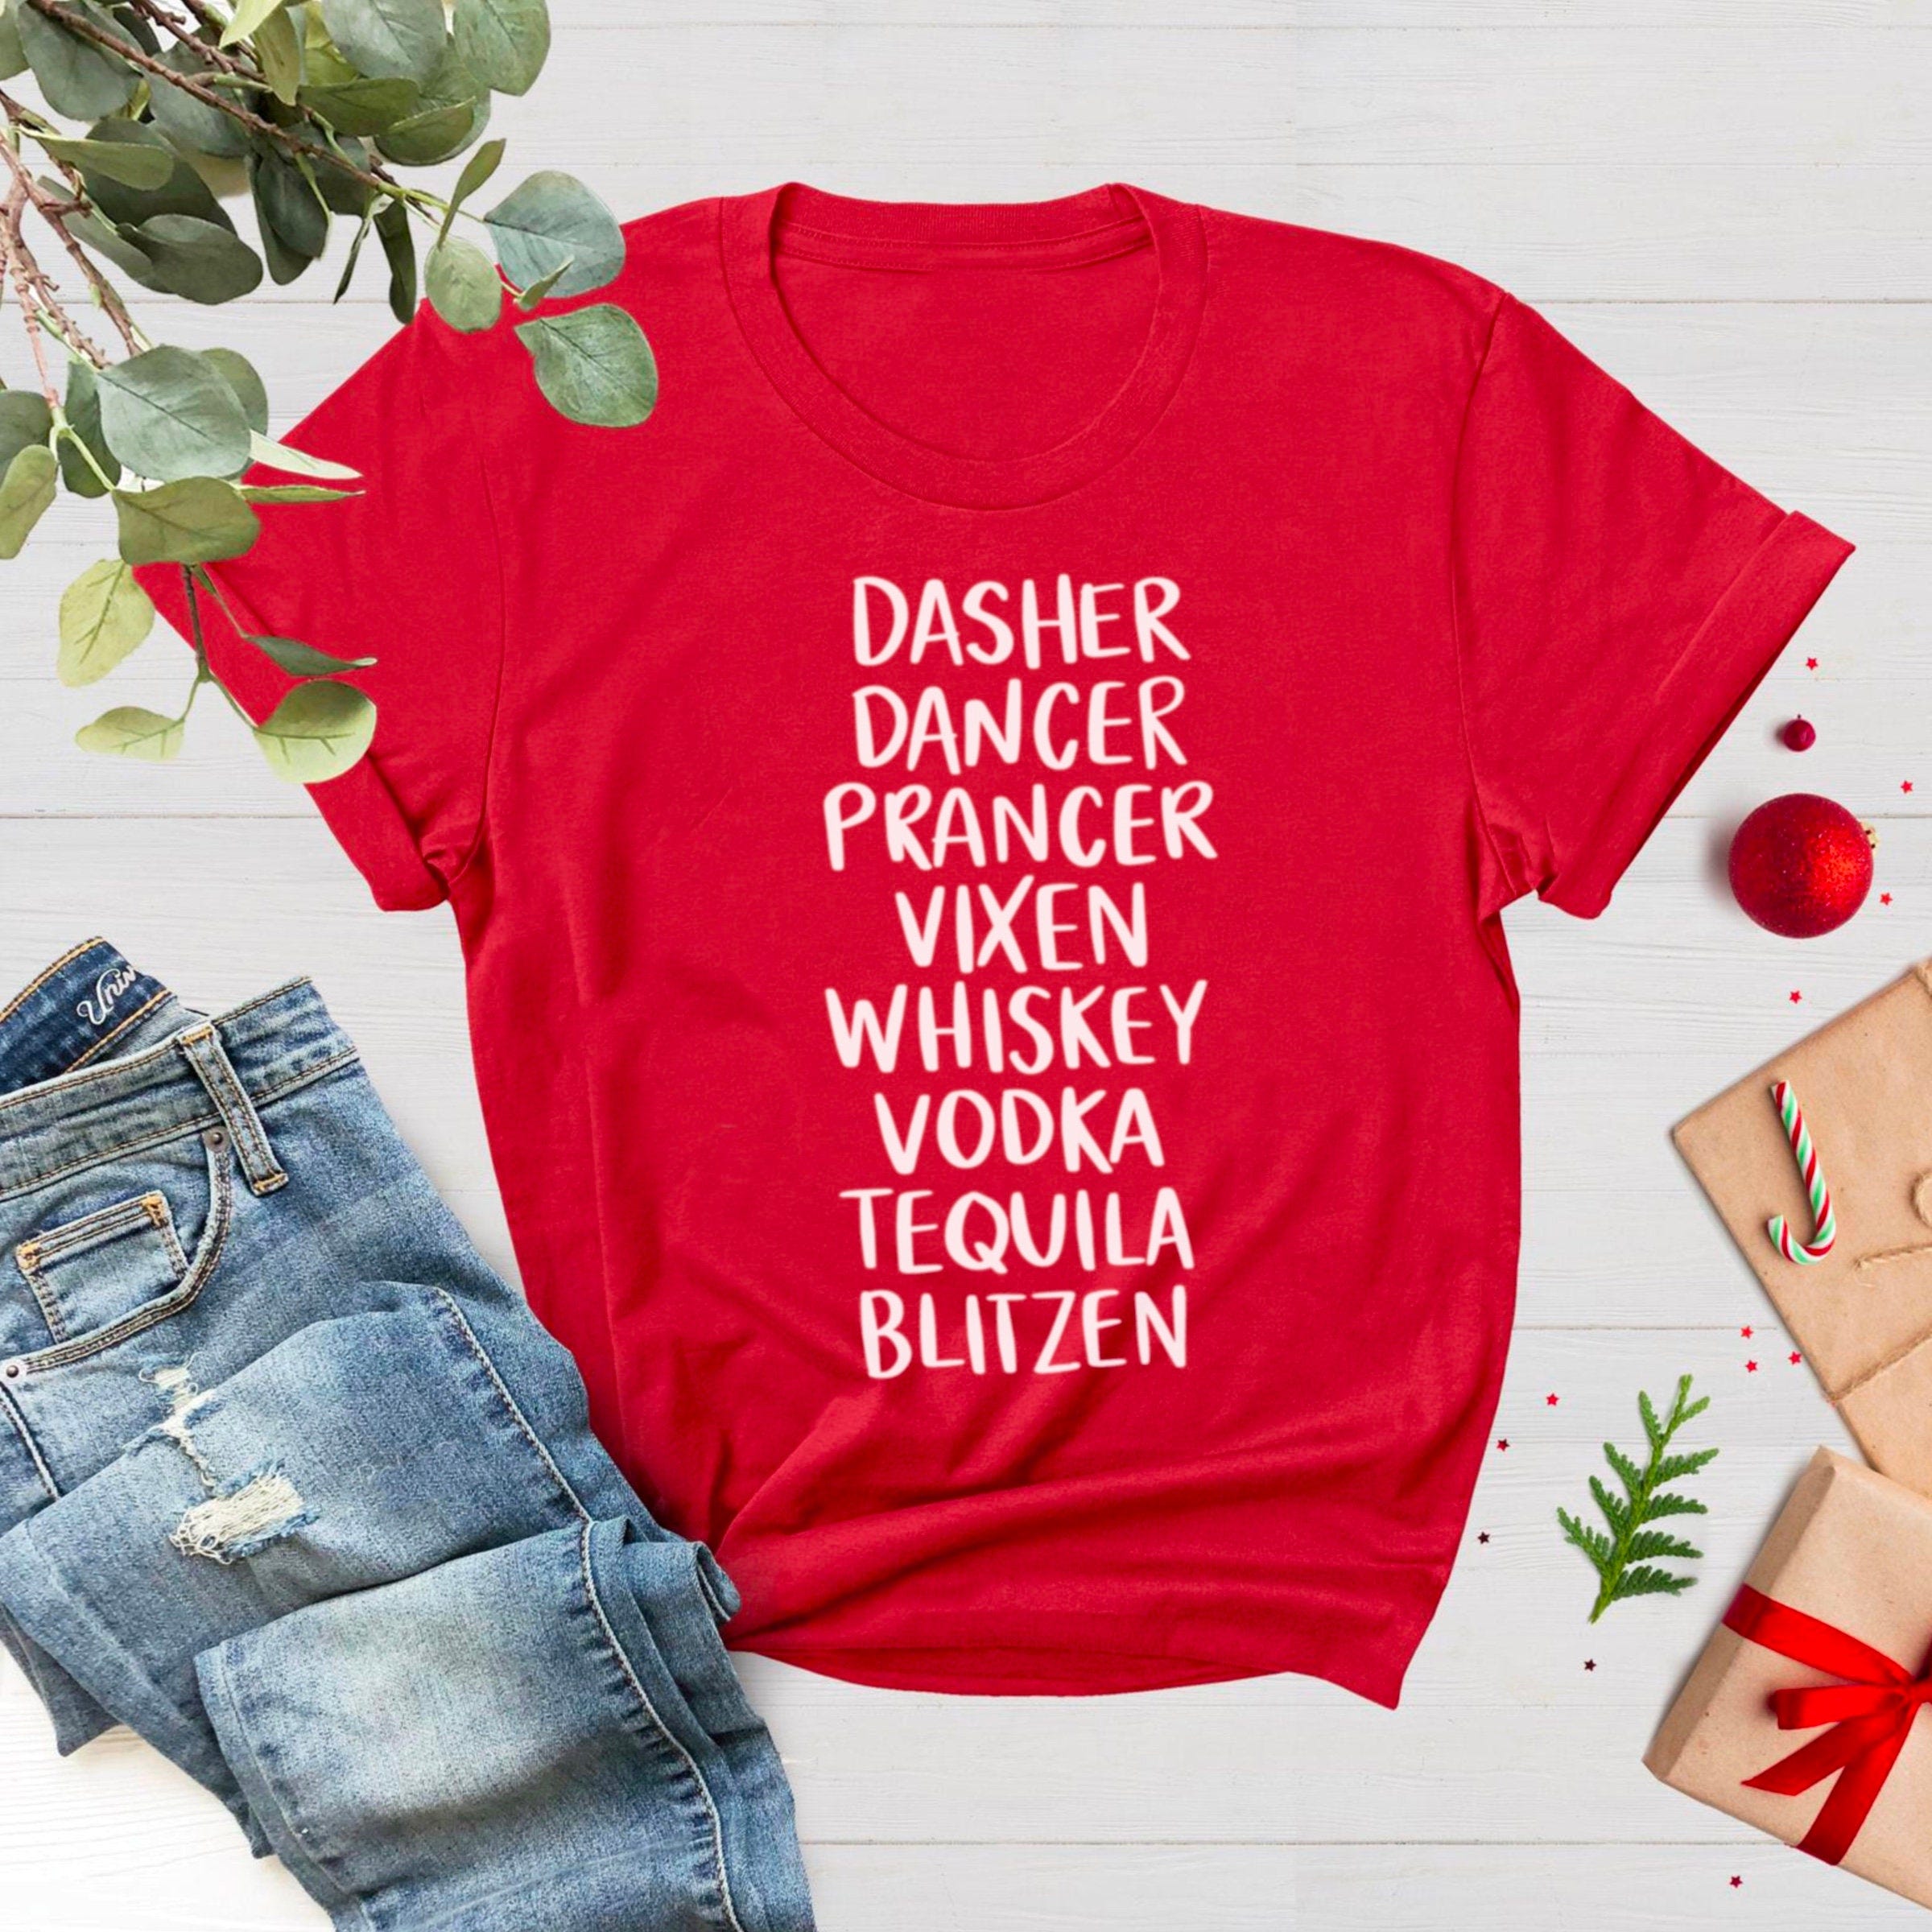 Funny Christmas SVG, Tequila, Whiskey, Vodka Svg, Drinking, Hilarious Christmas Shirt svg, Holiday svg, Cut File for Cricut, Silhouette